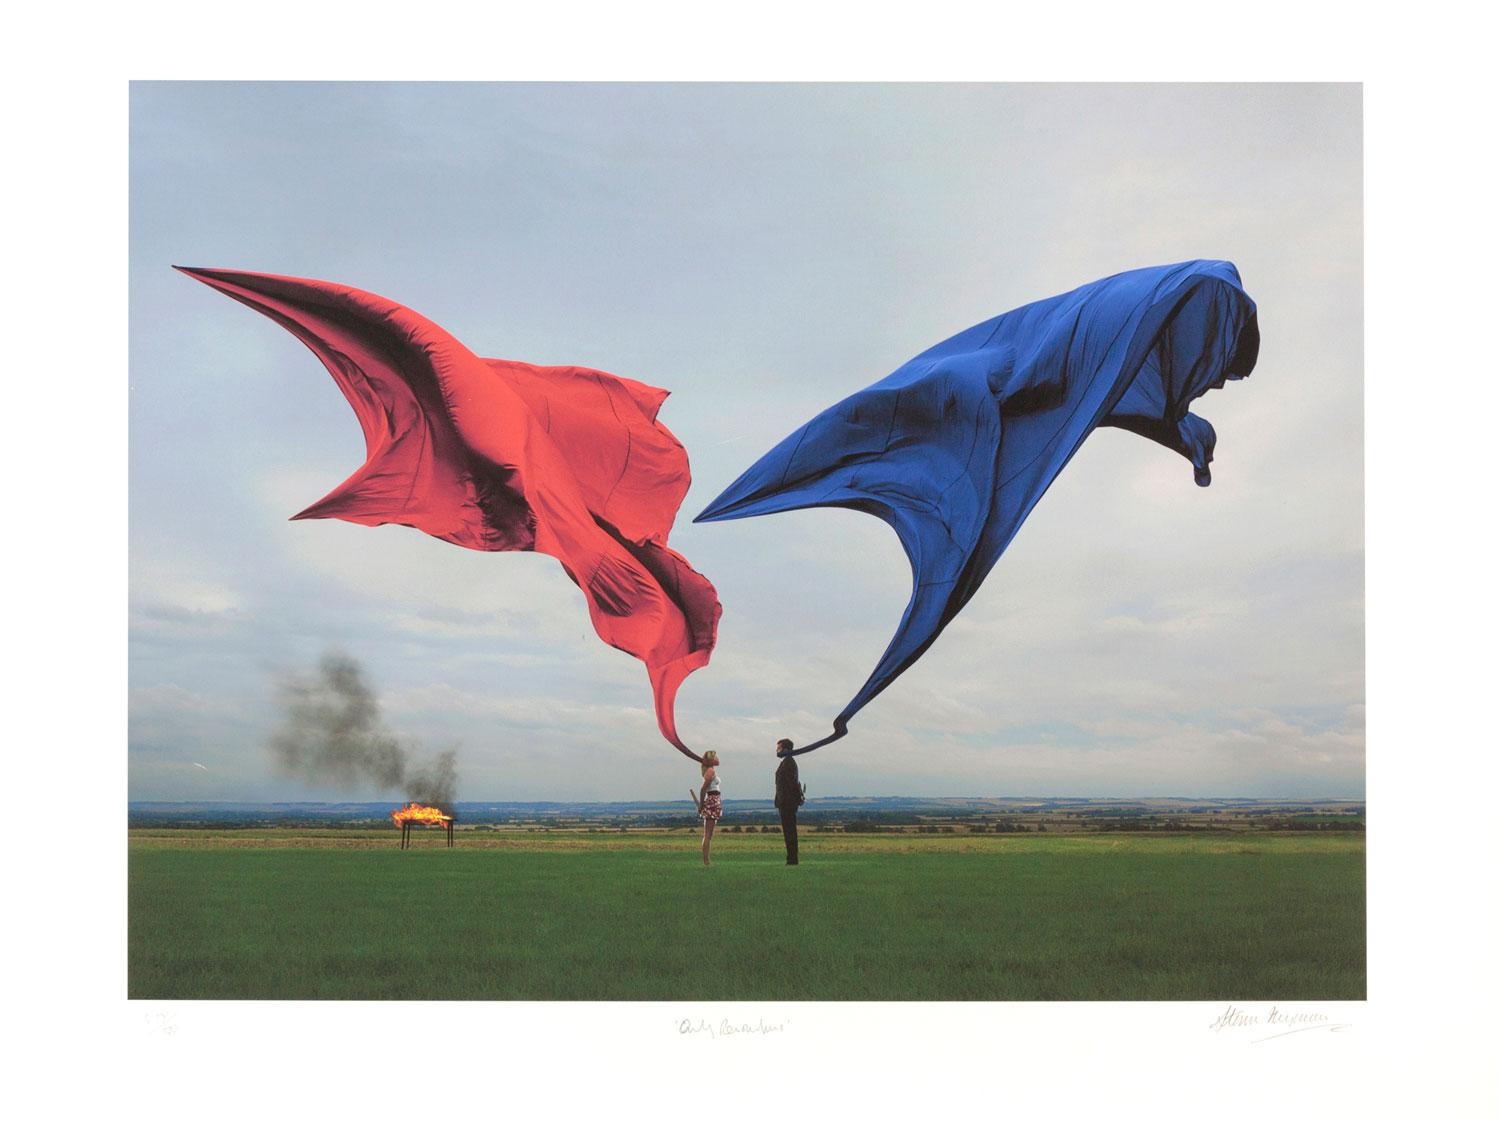 Artwork by Storm Thorgerson, ONLY REVOLUTIONS, Made of silkscreen on paper